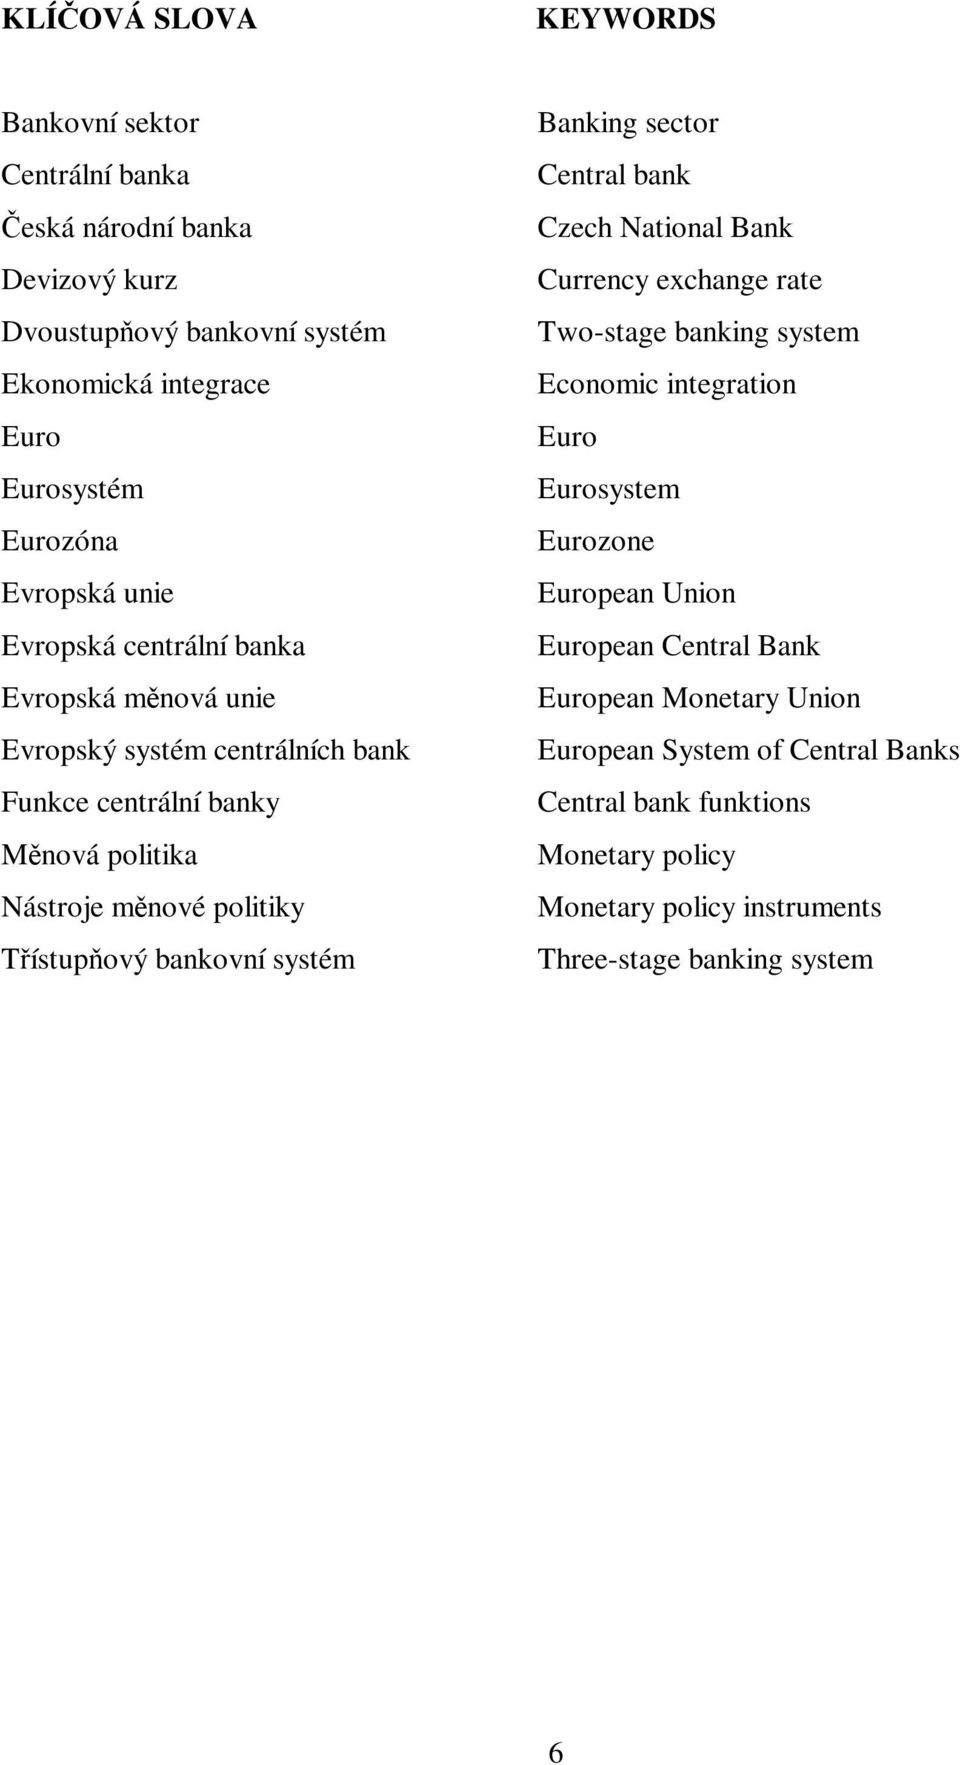 bankovní systém Banking sector Central bank Czech National Bank Currency exchange rate Two-stage banking system Economic integration Euro Eurosystem Eurozone European